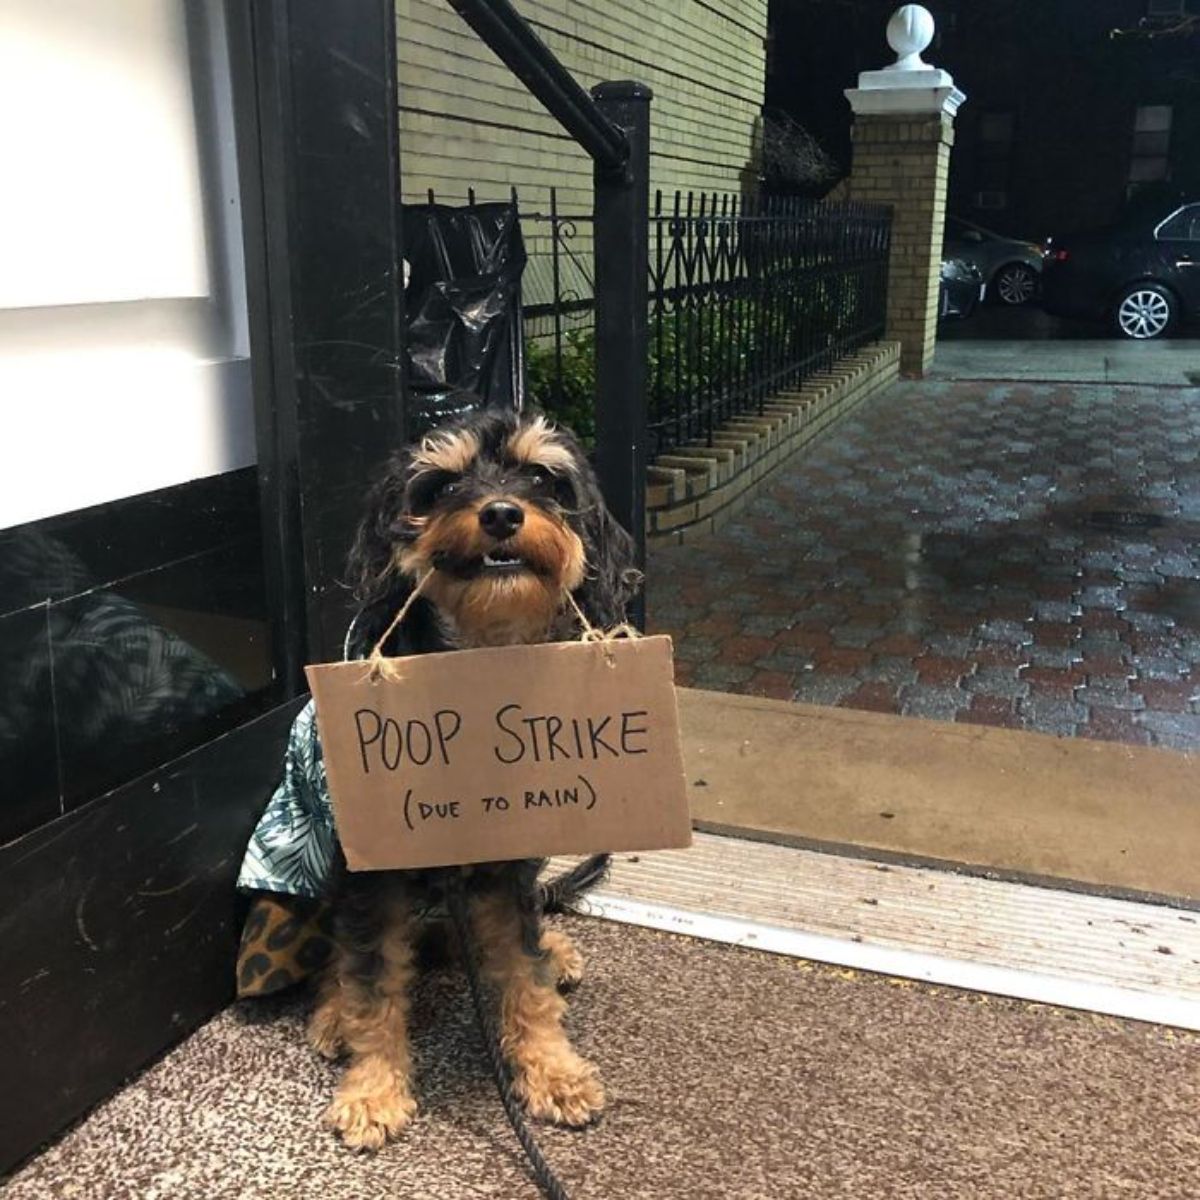 black and brown yorkshire terrier holding a sign saying poop strike (due to rain)